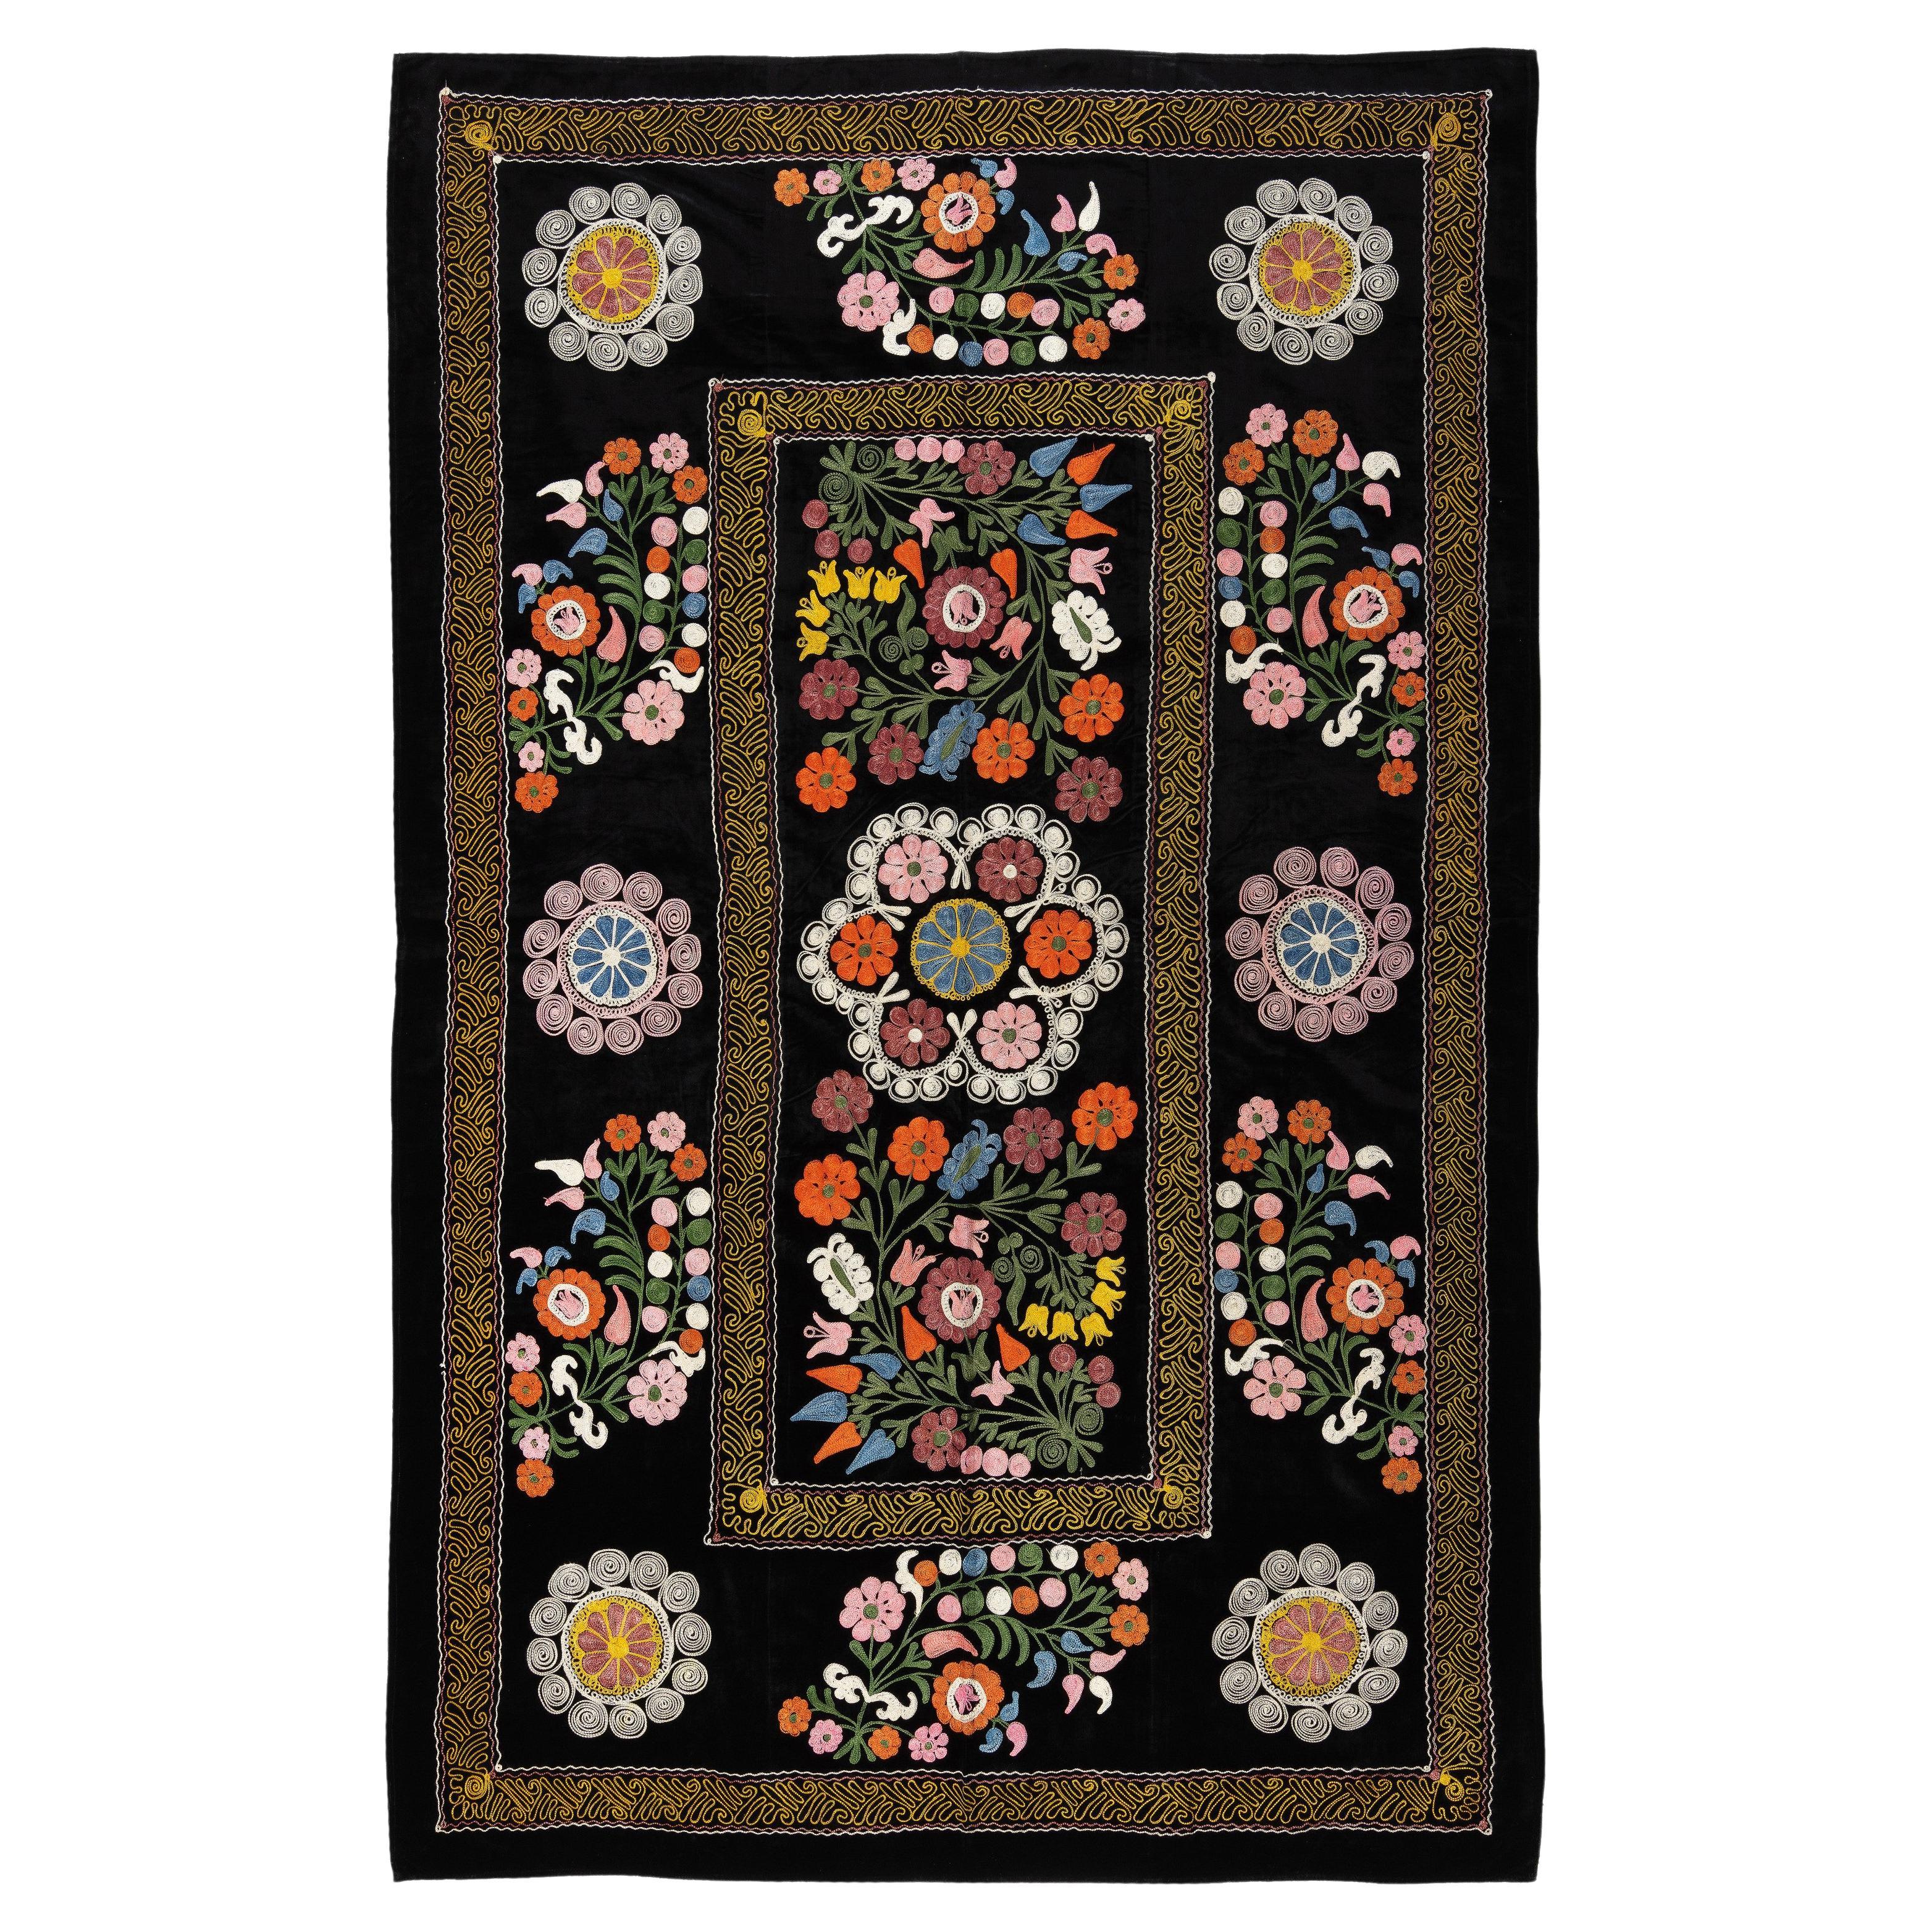 4.3x6.8 Ft Vintage Silk Embroidery Bed Cover, Asian Suzani Wall Hanging in Black